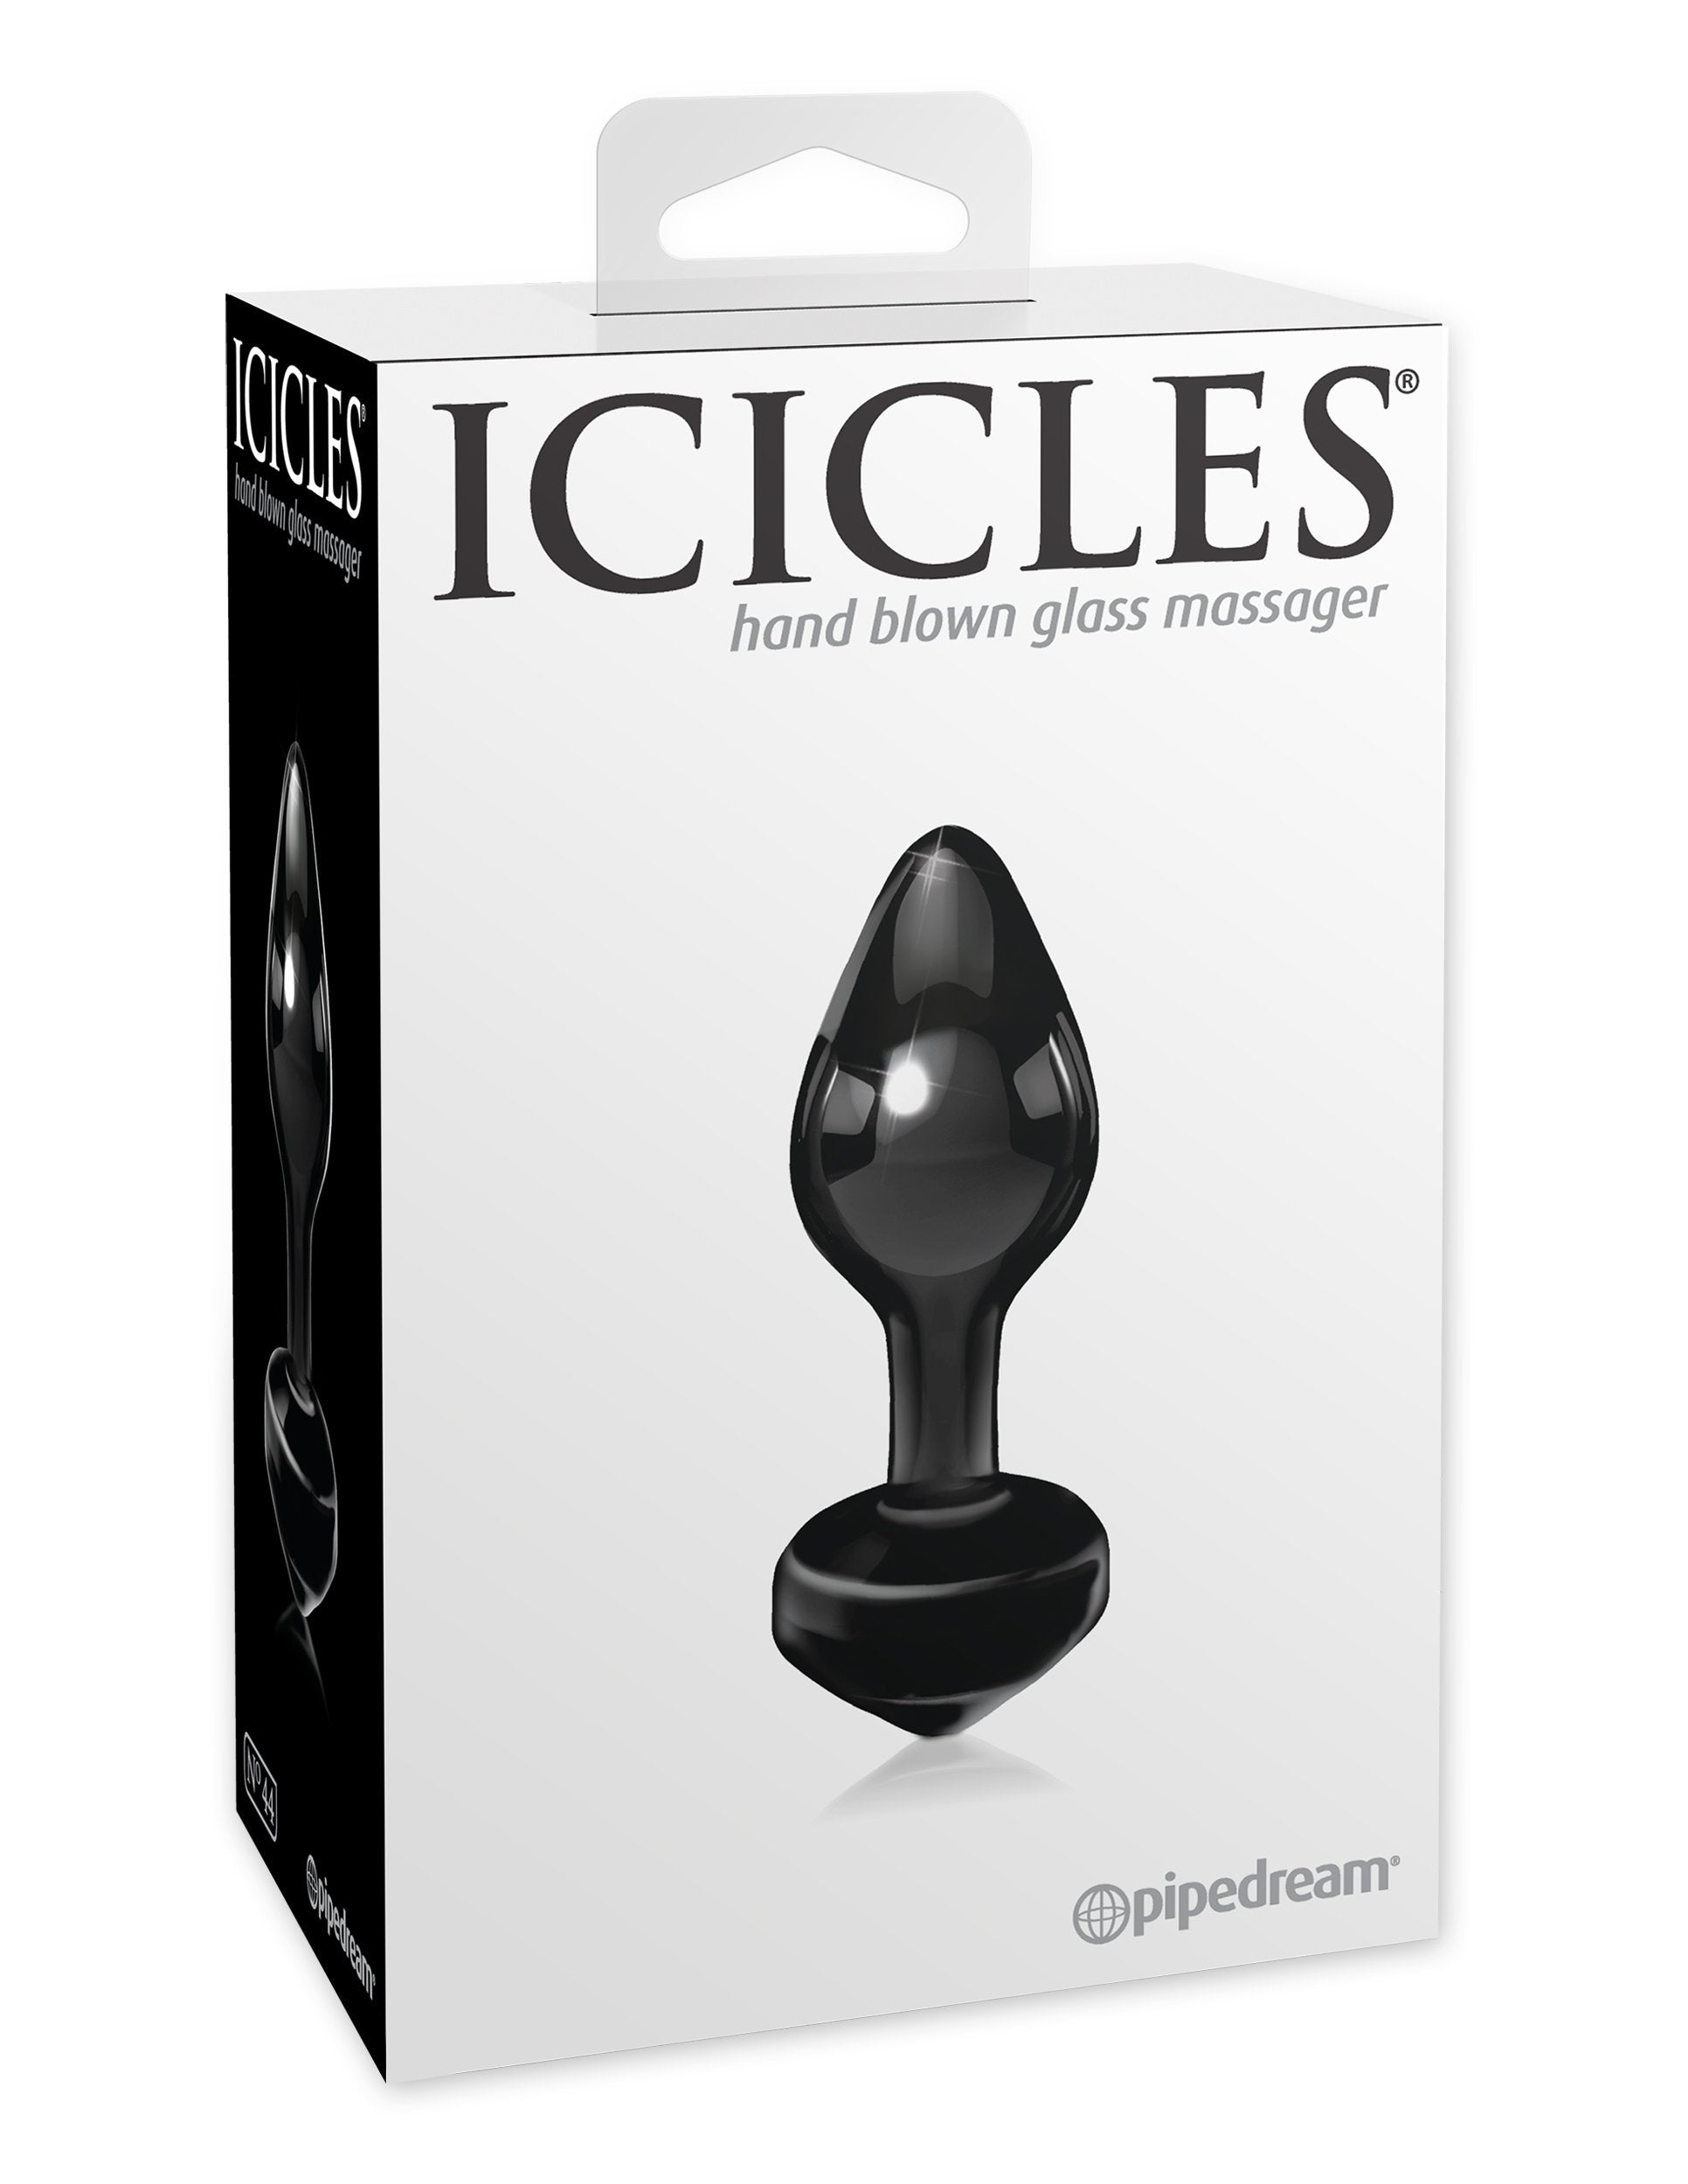 Icicles 44 Hand Blown Glass Anal Plug - Buy At Luxury Toy X - Free 3-Day Shipping